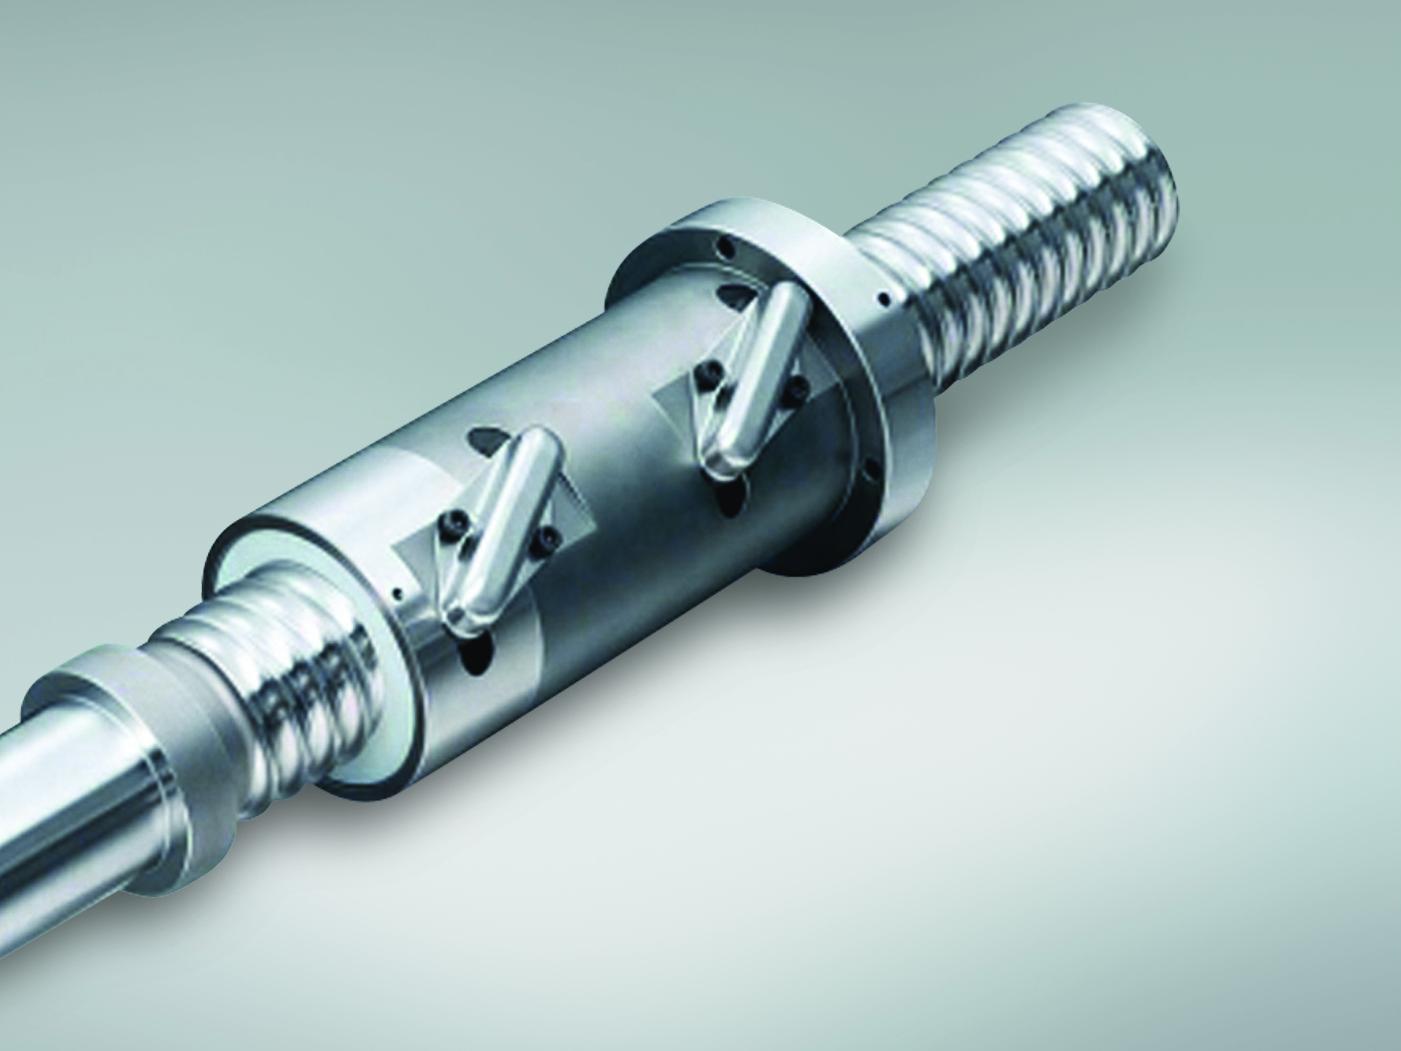 Press brake specialist opts for NSK high-load ball screws